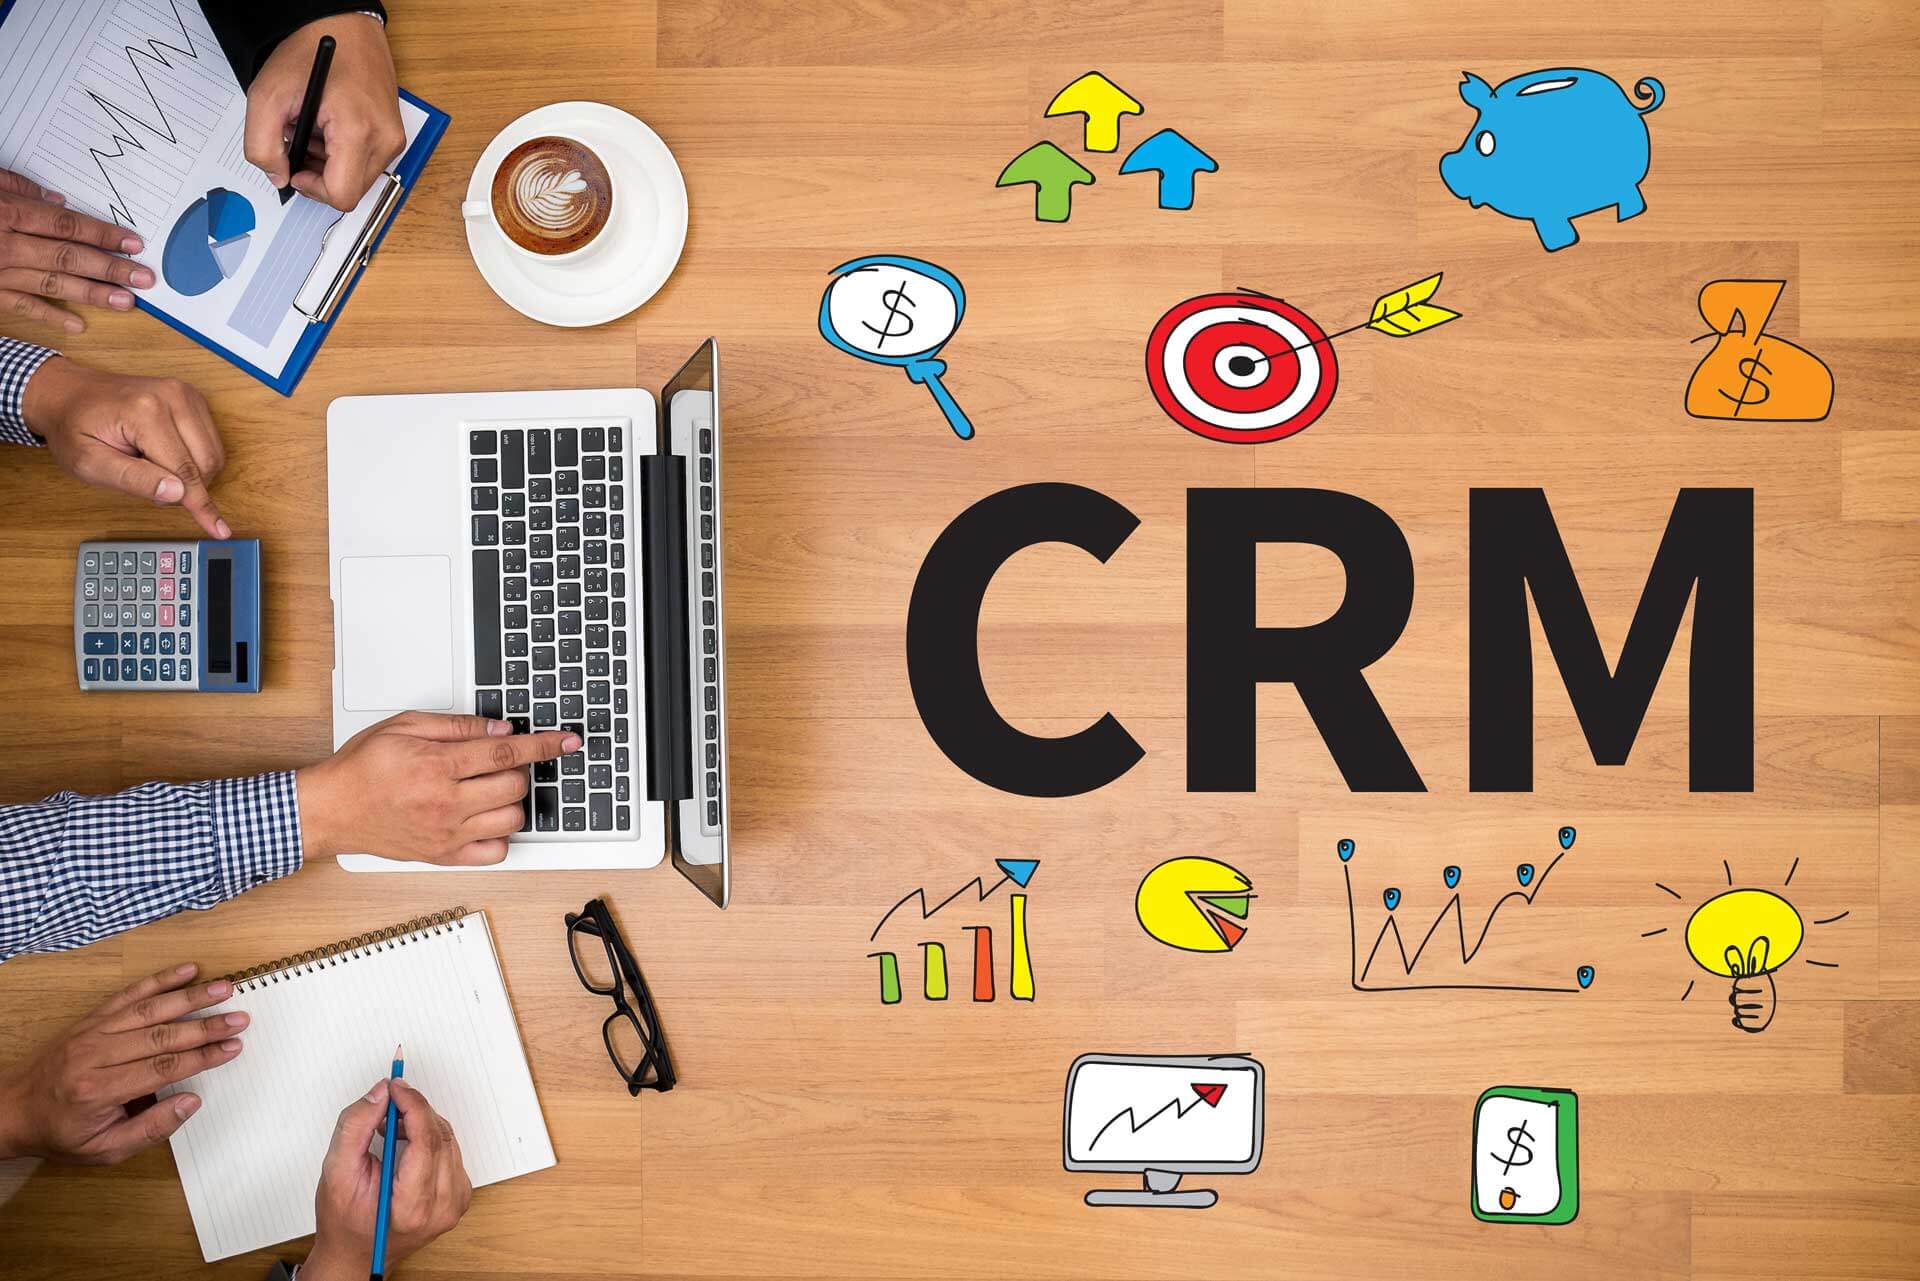 Definition of CRM